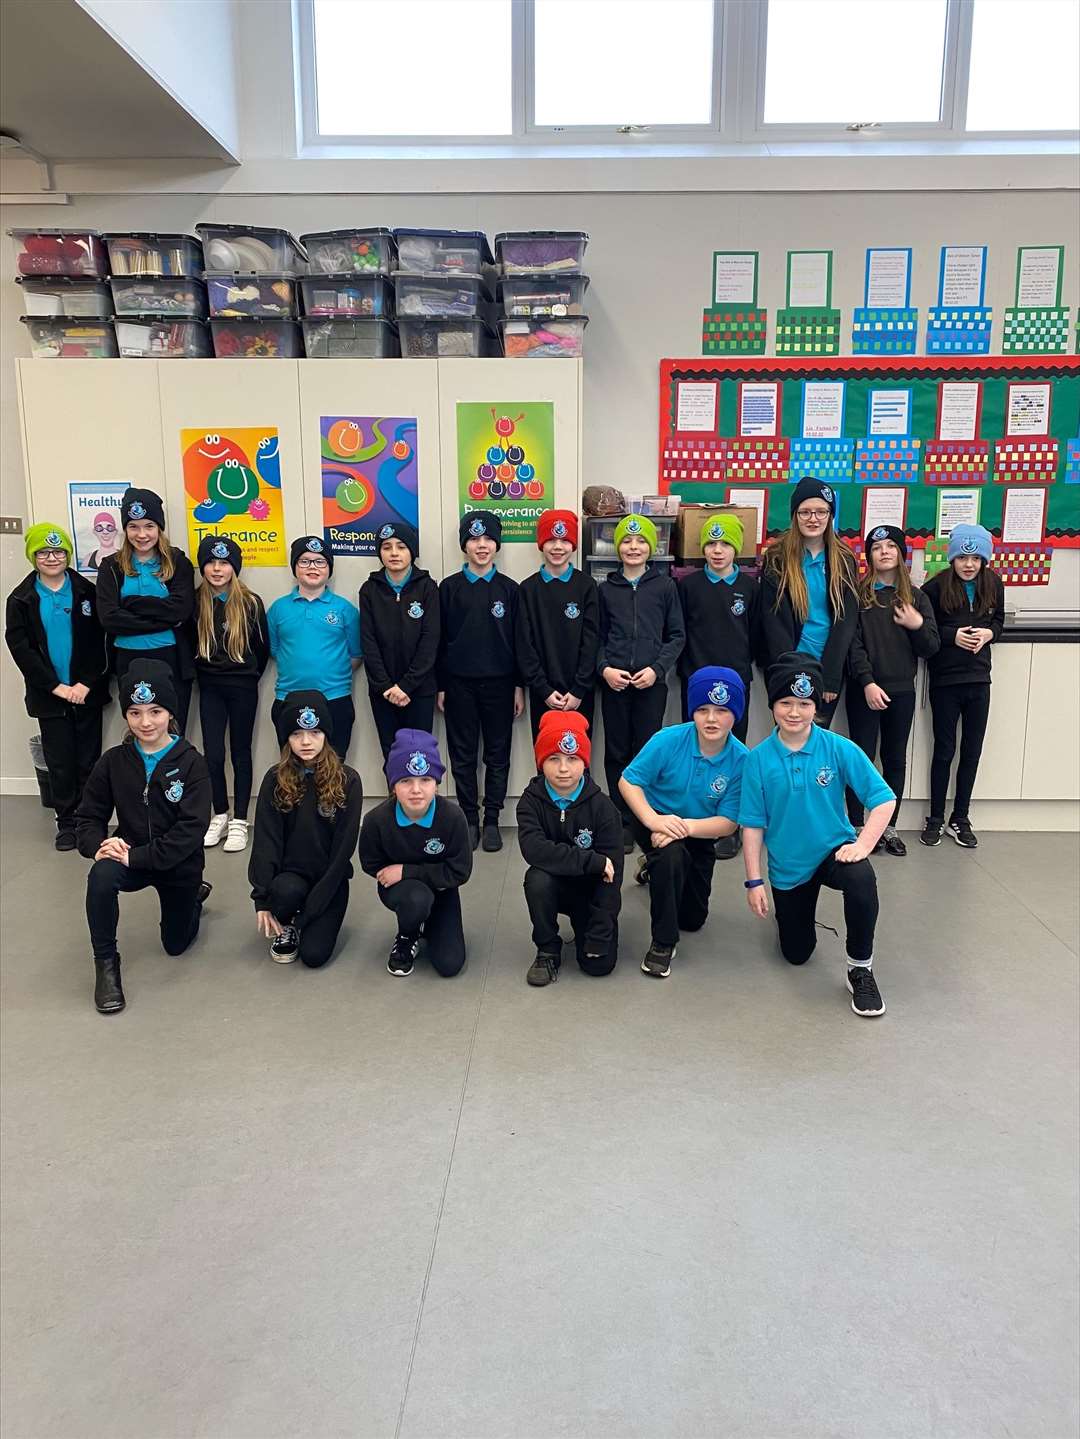 P4-7 pupils in their new hats which were provided by the pupil council, who raised £70 by holding a uniform sale.